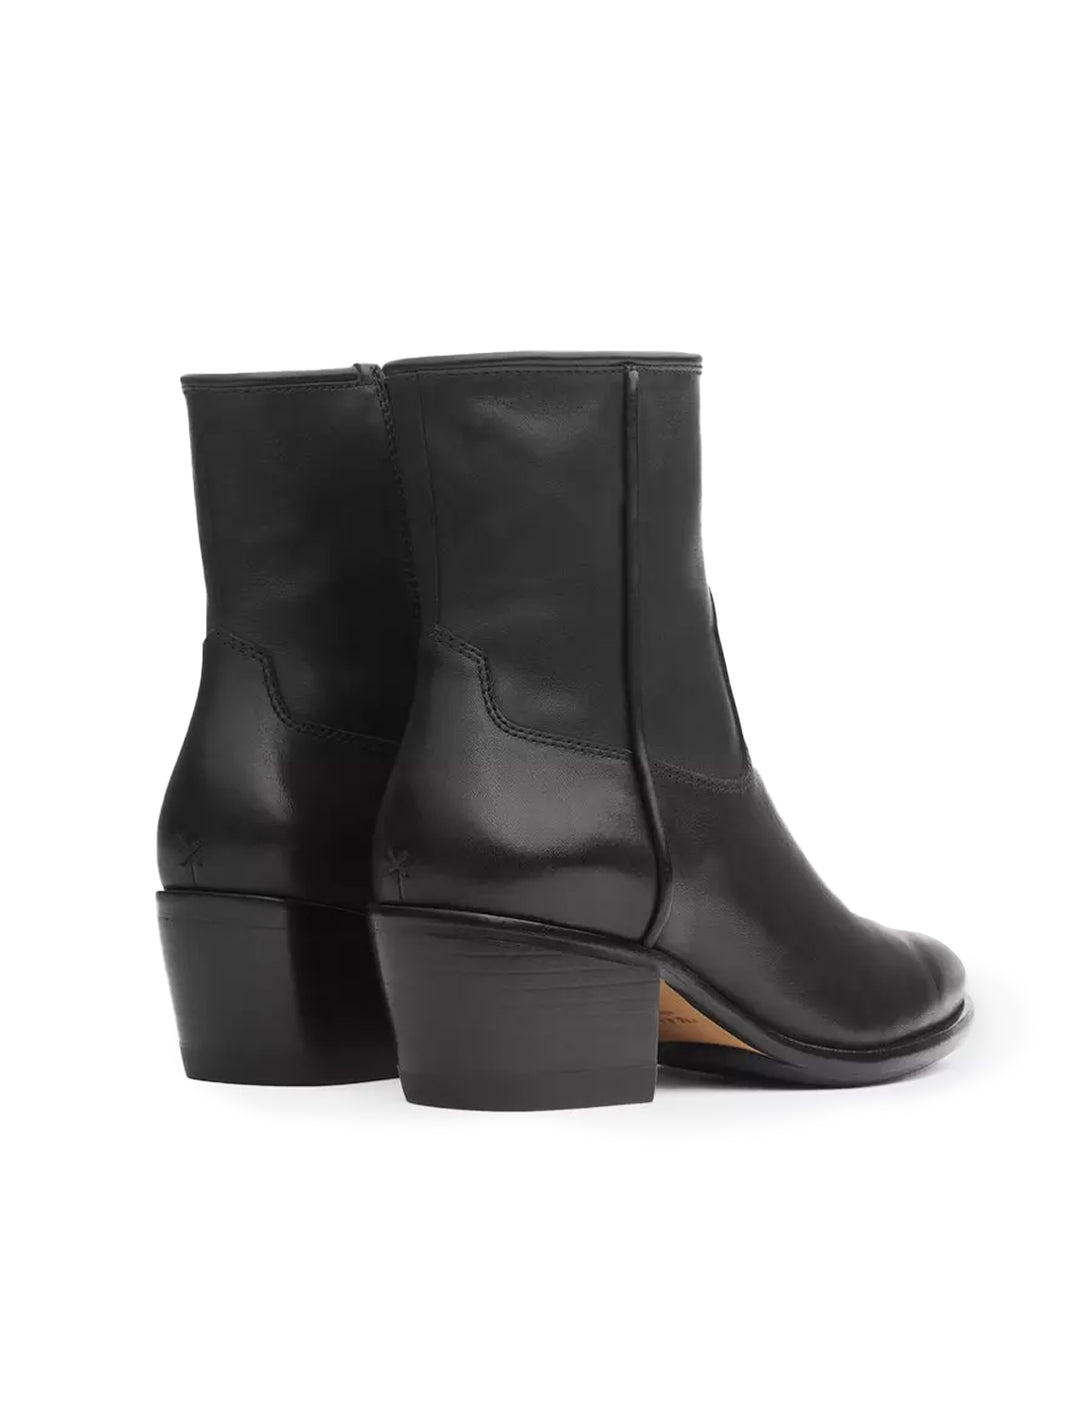 Back angle view of Rag & Bone's mustang boots in black.